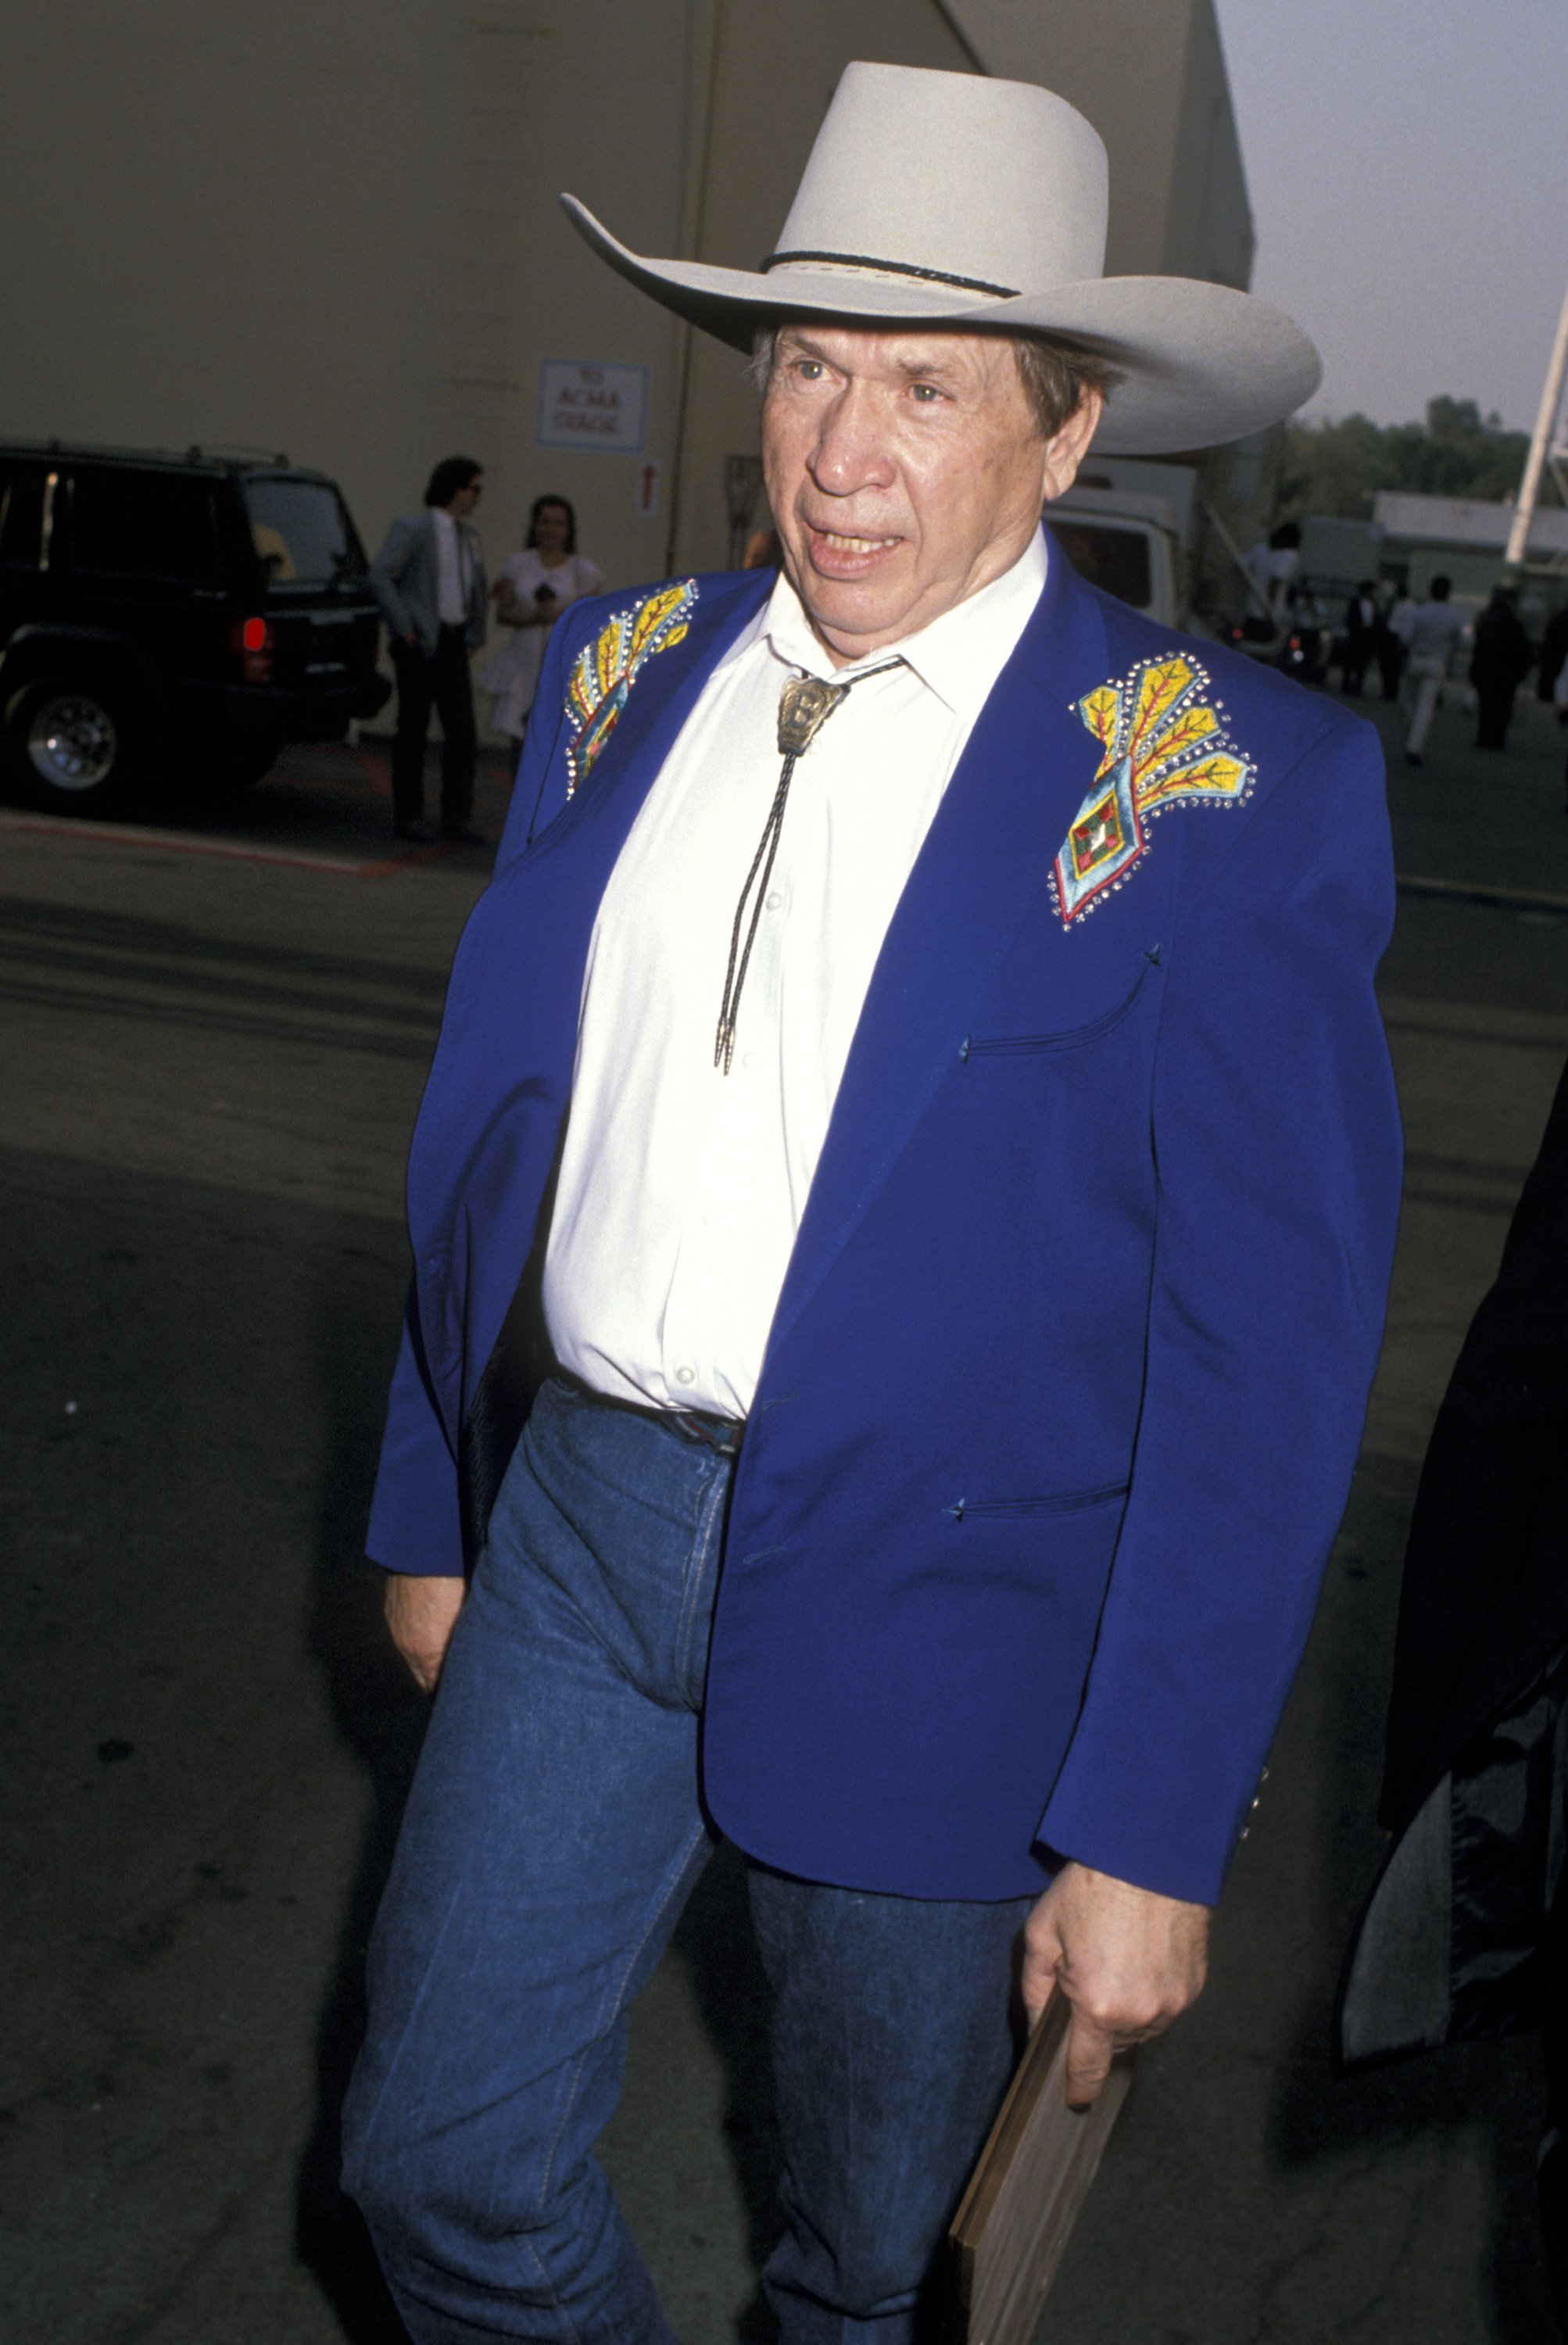 Buck Owens at the 24th Annual Academy of Country Music Awards at Disney Studio in Los Angeles, California | Photo: Ron Galella, Ltd./Ron Galella Collection via Getty Images